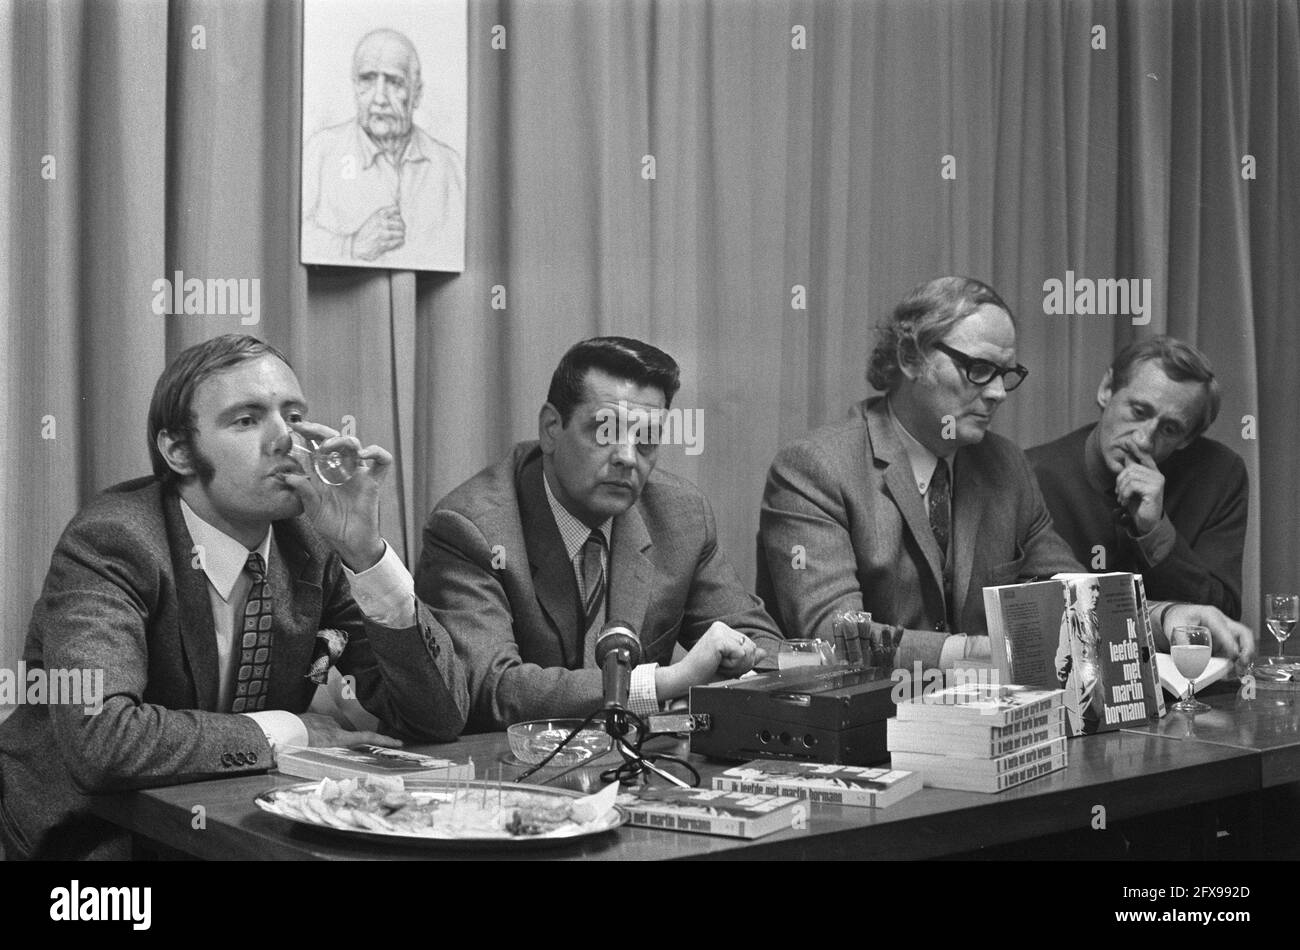 Book I lived with Martin Bormann published by Publisher Born, press conference The Hague . Recent portrait of Bormann, November 13, 1969, books, press conferences, portraits, publishing houses, The Netherlands, 20th century press agency photo, news to remember, documentary, historic photography 1945-1990, visual stories, human history of the Twentieth Century, capturing moments in time Stock Photo